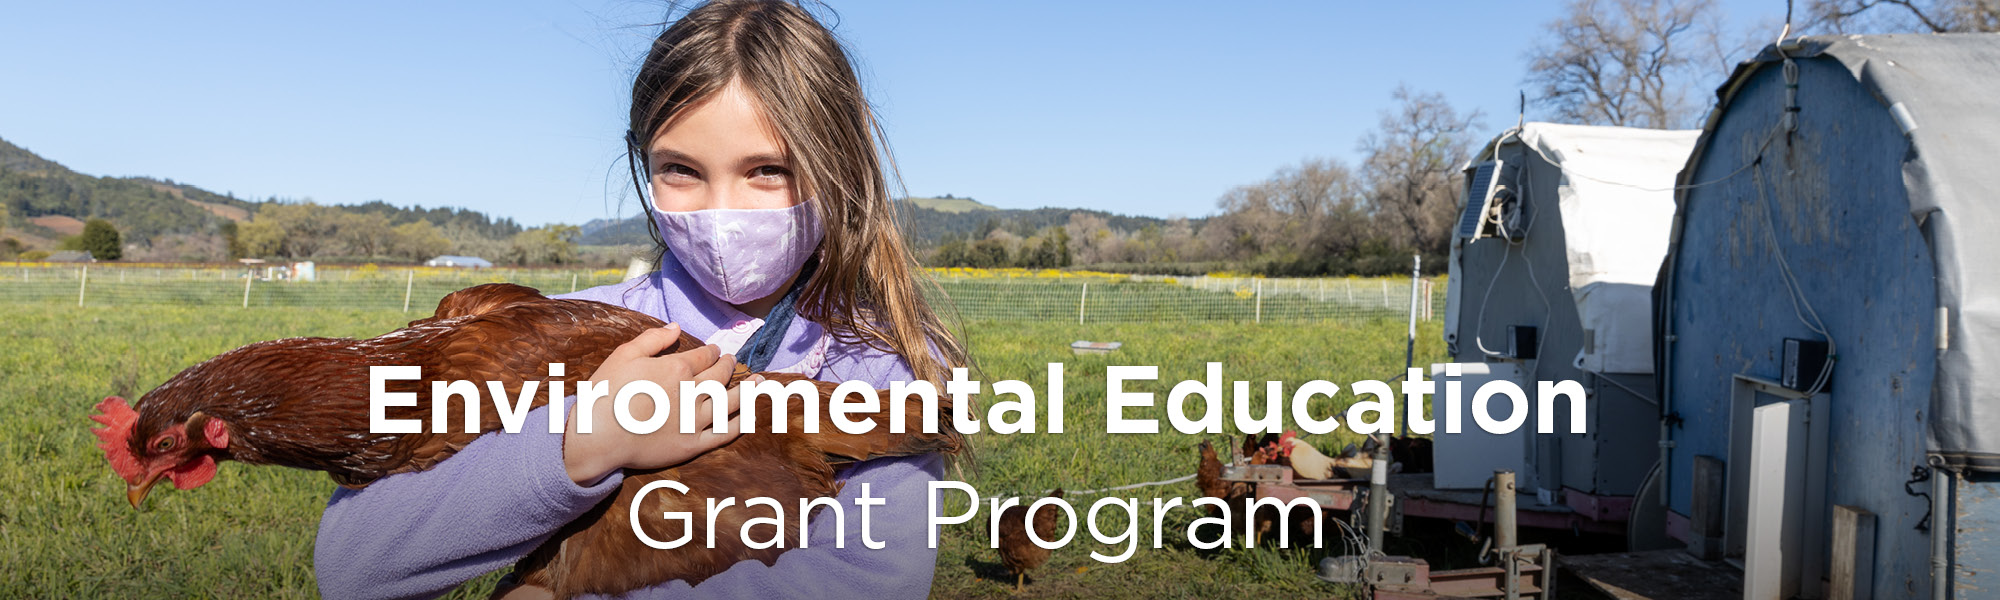 A young girl on a farm wearing a purple sweater and purple mask holding a chicken in her arms.. Text reads: Environmental Education Grant Program